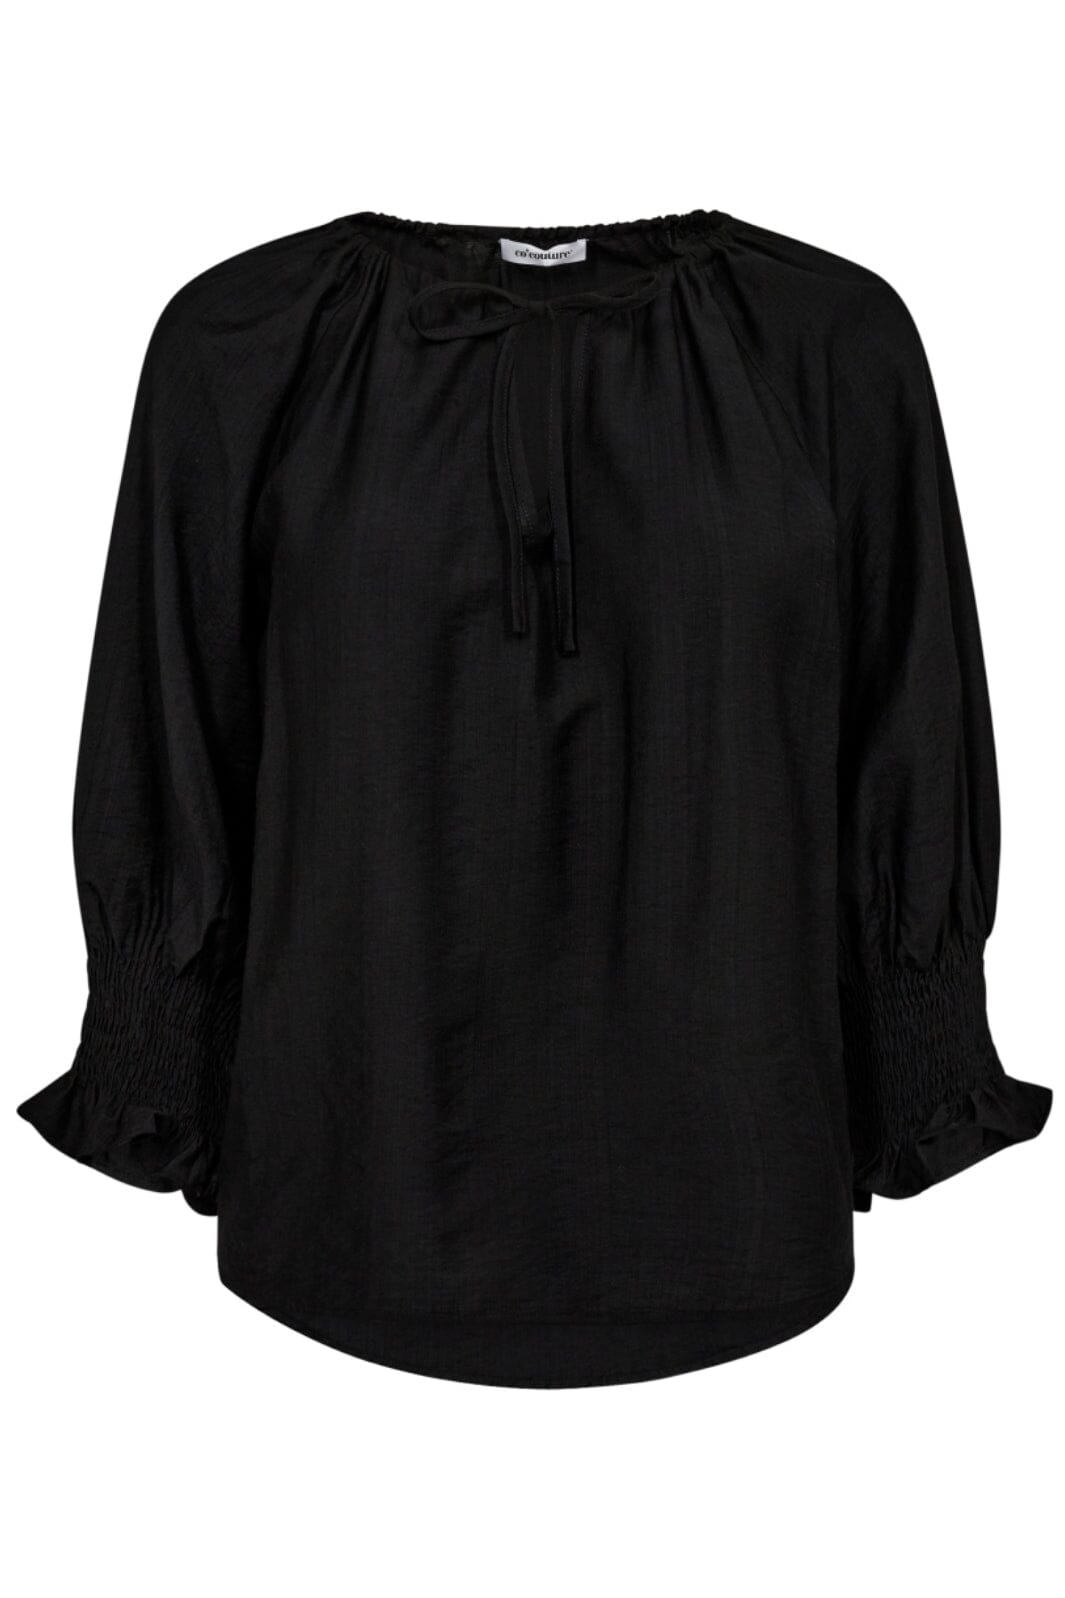 Co´couture - Heracc Blouse 35538 - 96 Black Skjorter 